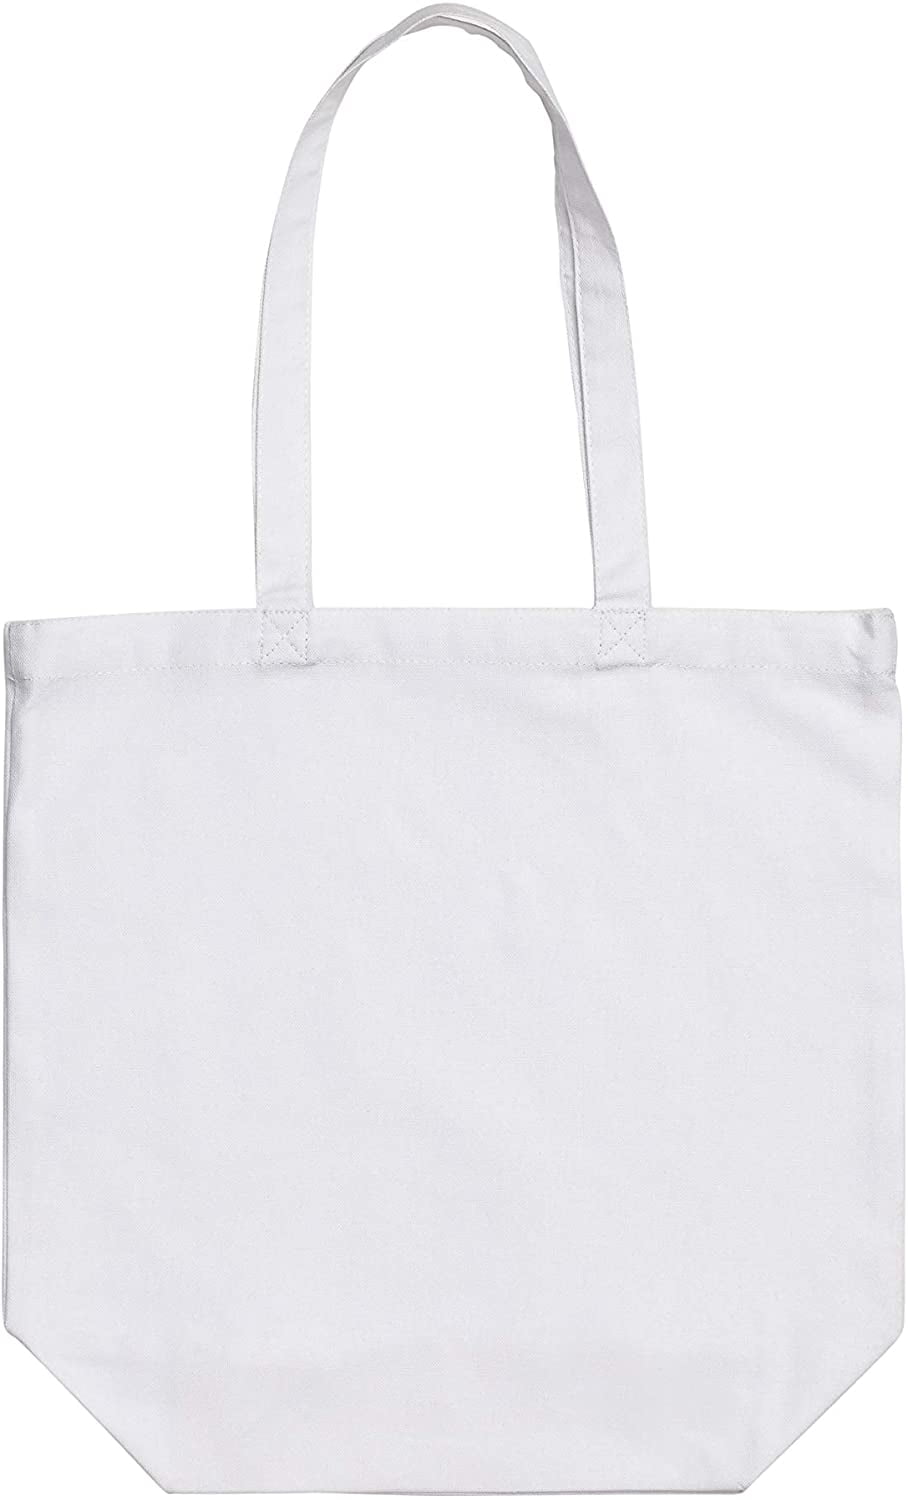 Cotton Tote Bag Many Colour Good for Printing Wholesale Bag For Life 